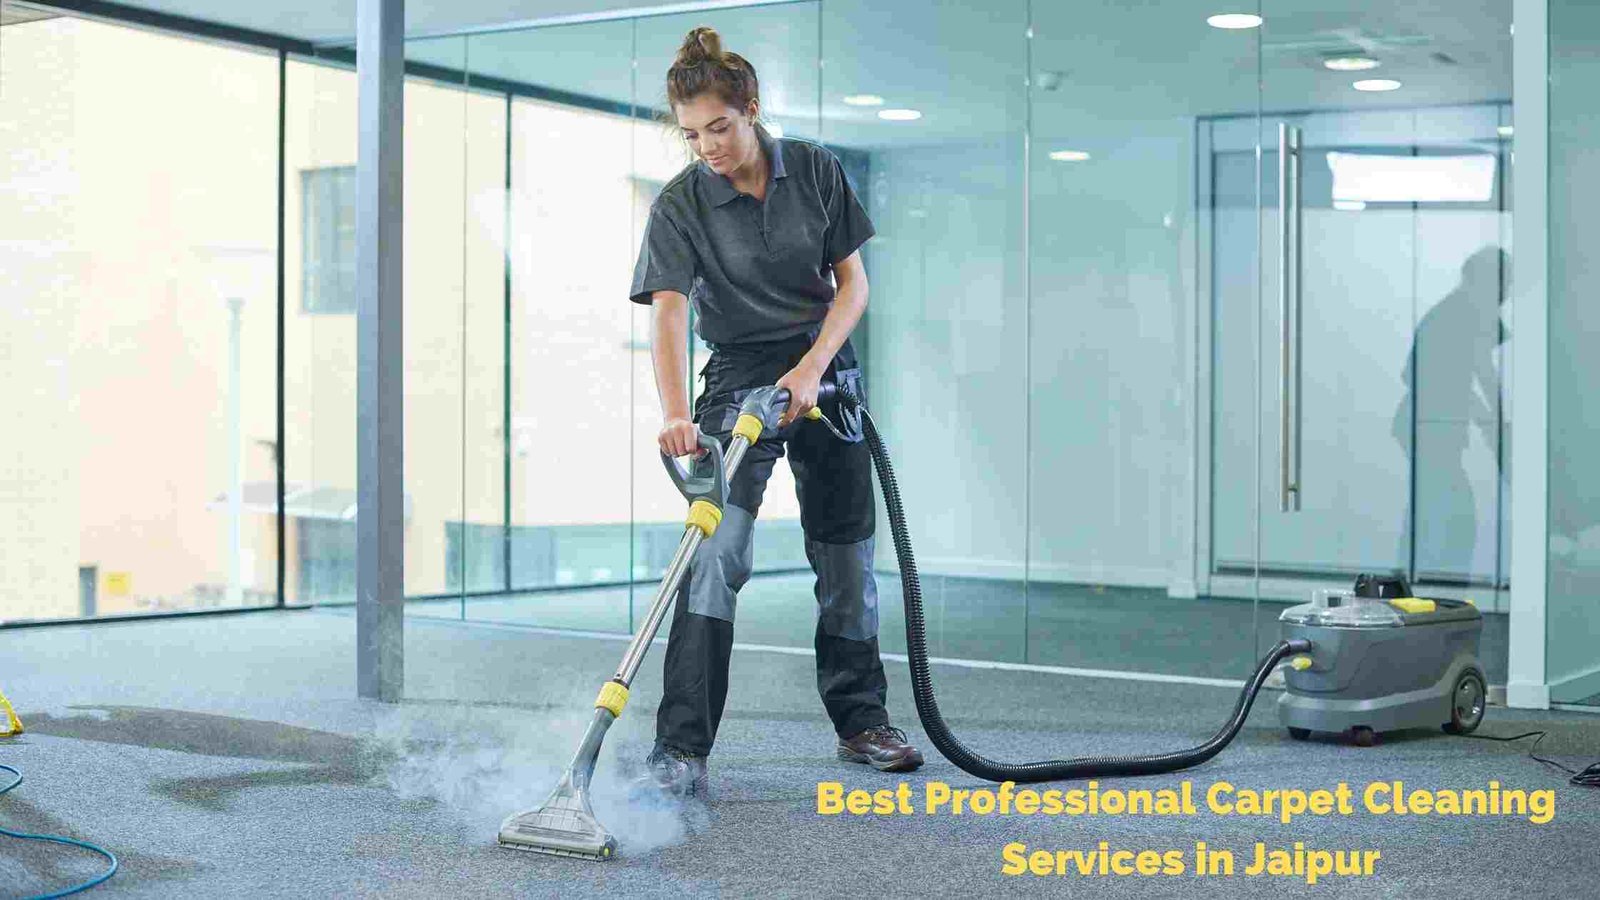 Carpet Cleaning Services in Jaipur